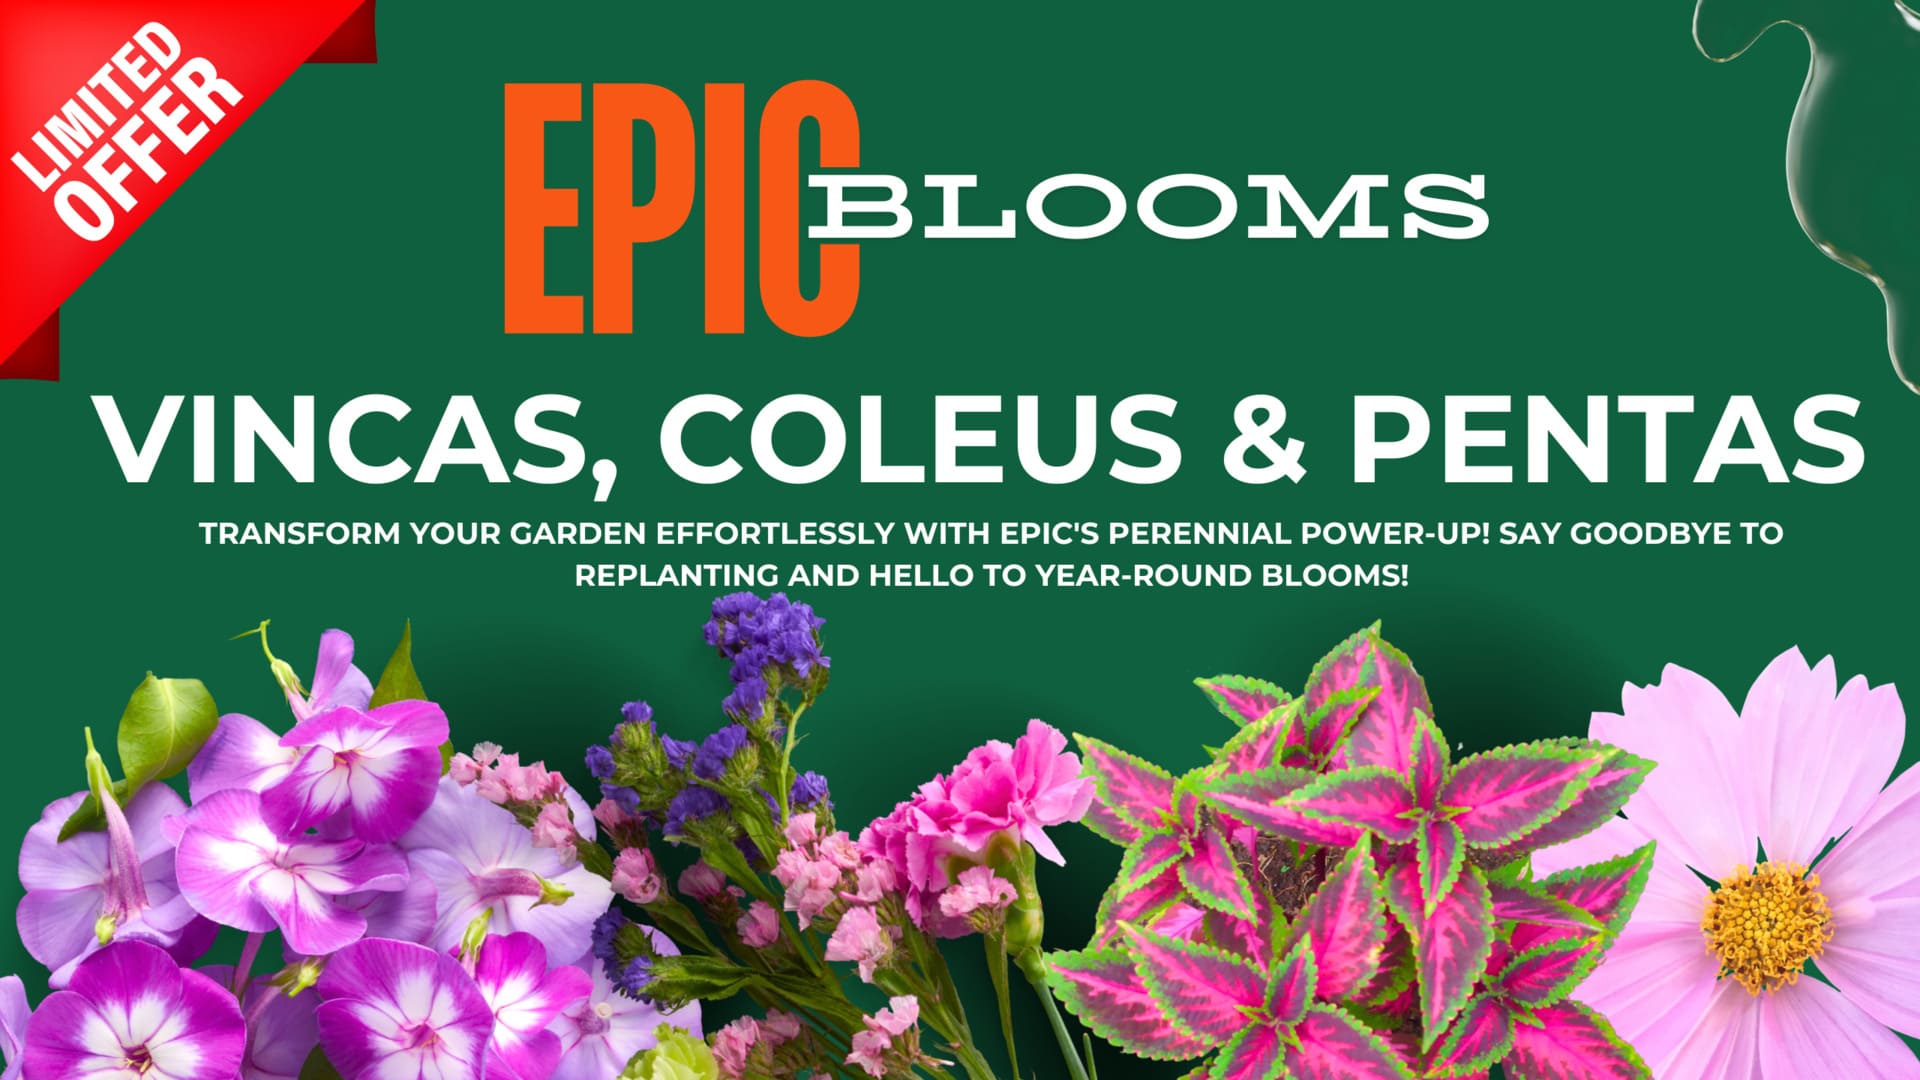 Limited offer. EPIC blooms. Vincas, coleus & pentas. Transform your garden effortlessly with EPIC's perennial power-up! Say goodbye to replanting and hello to year-round blooms!